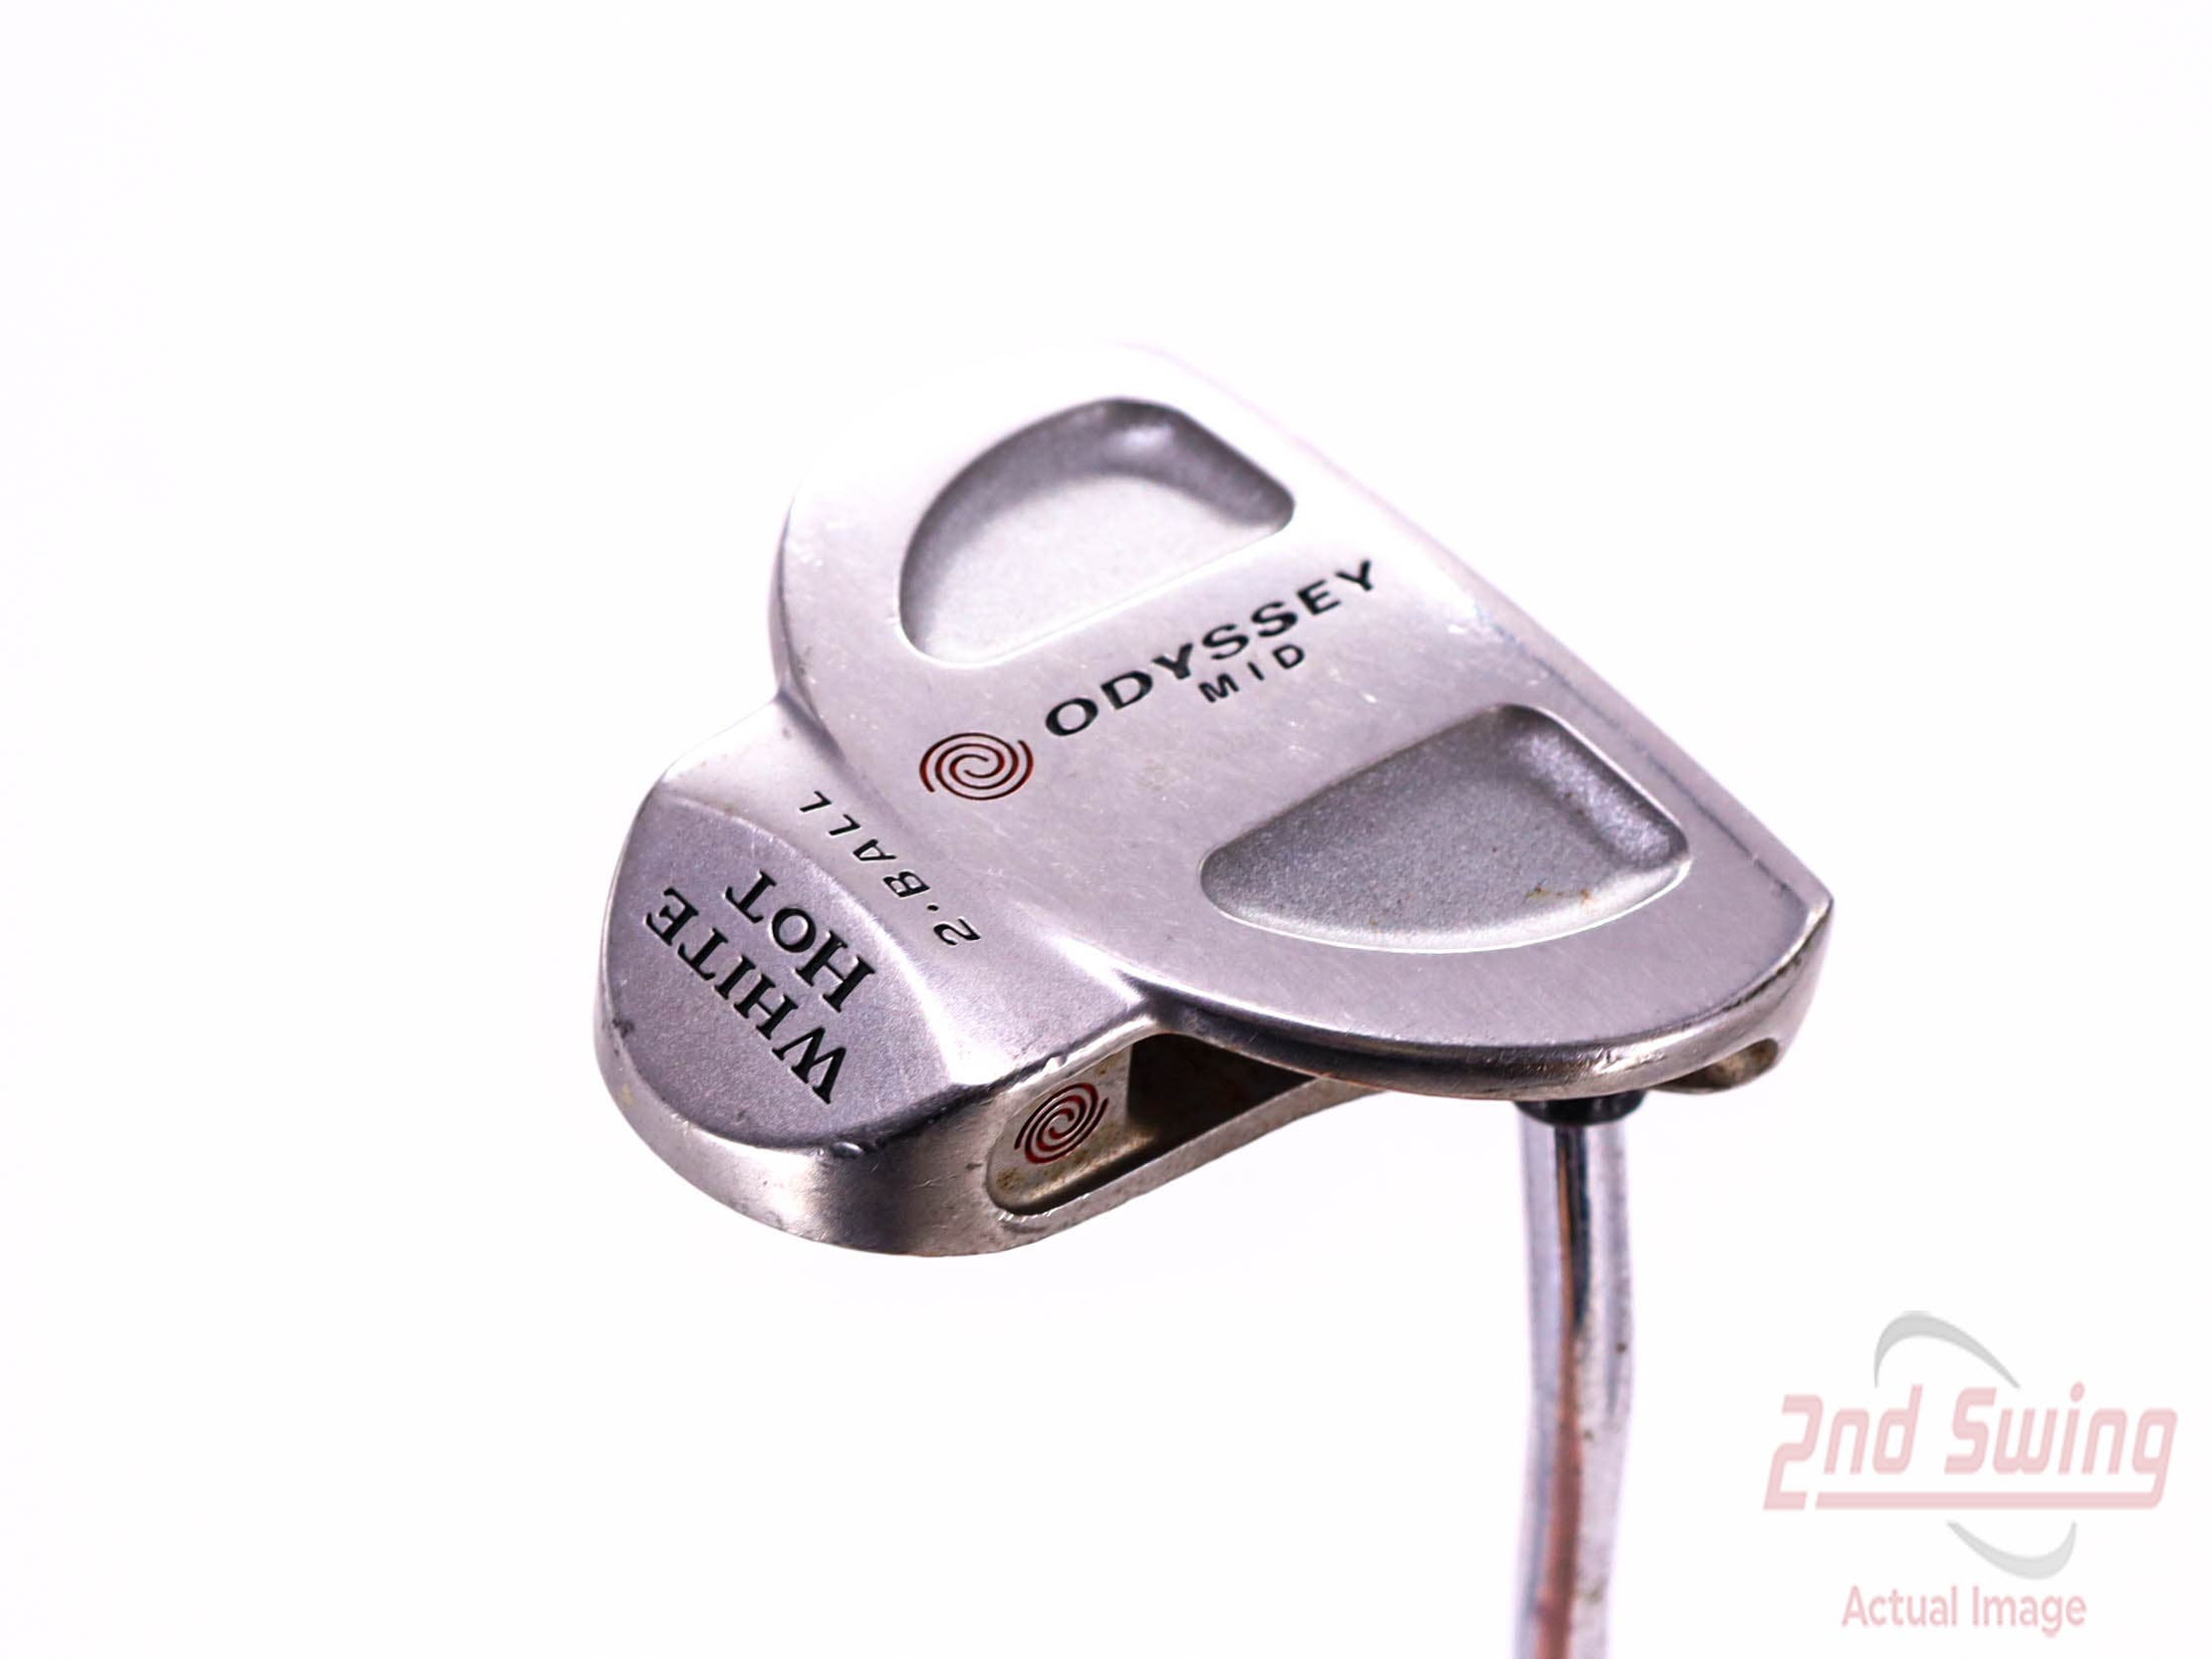 Odyssey White Hot 2-Ball Mid Putter | 2nd Swing Golf